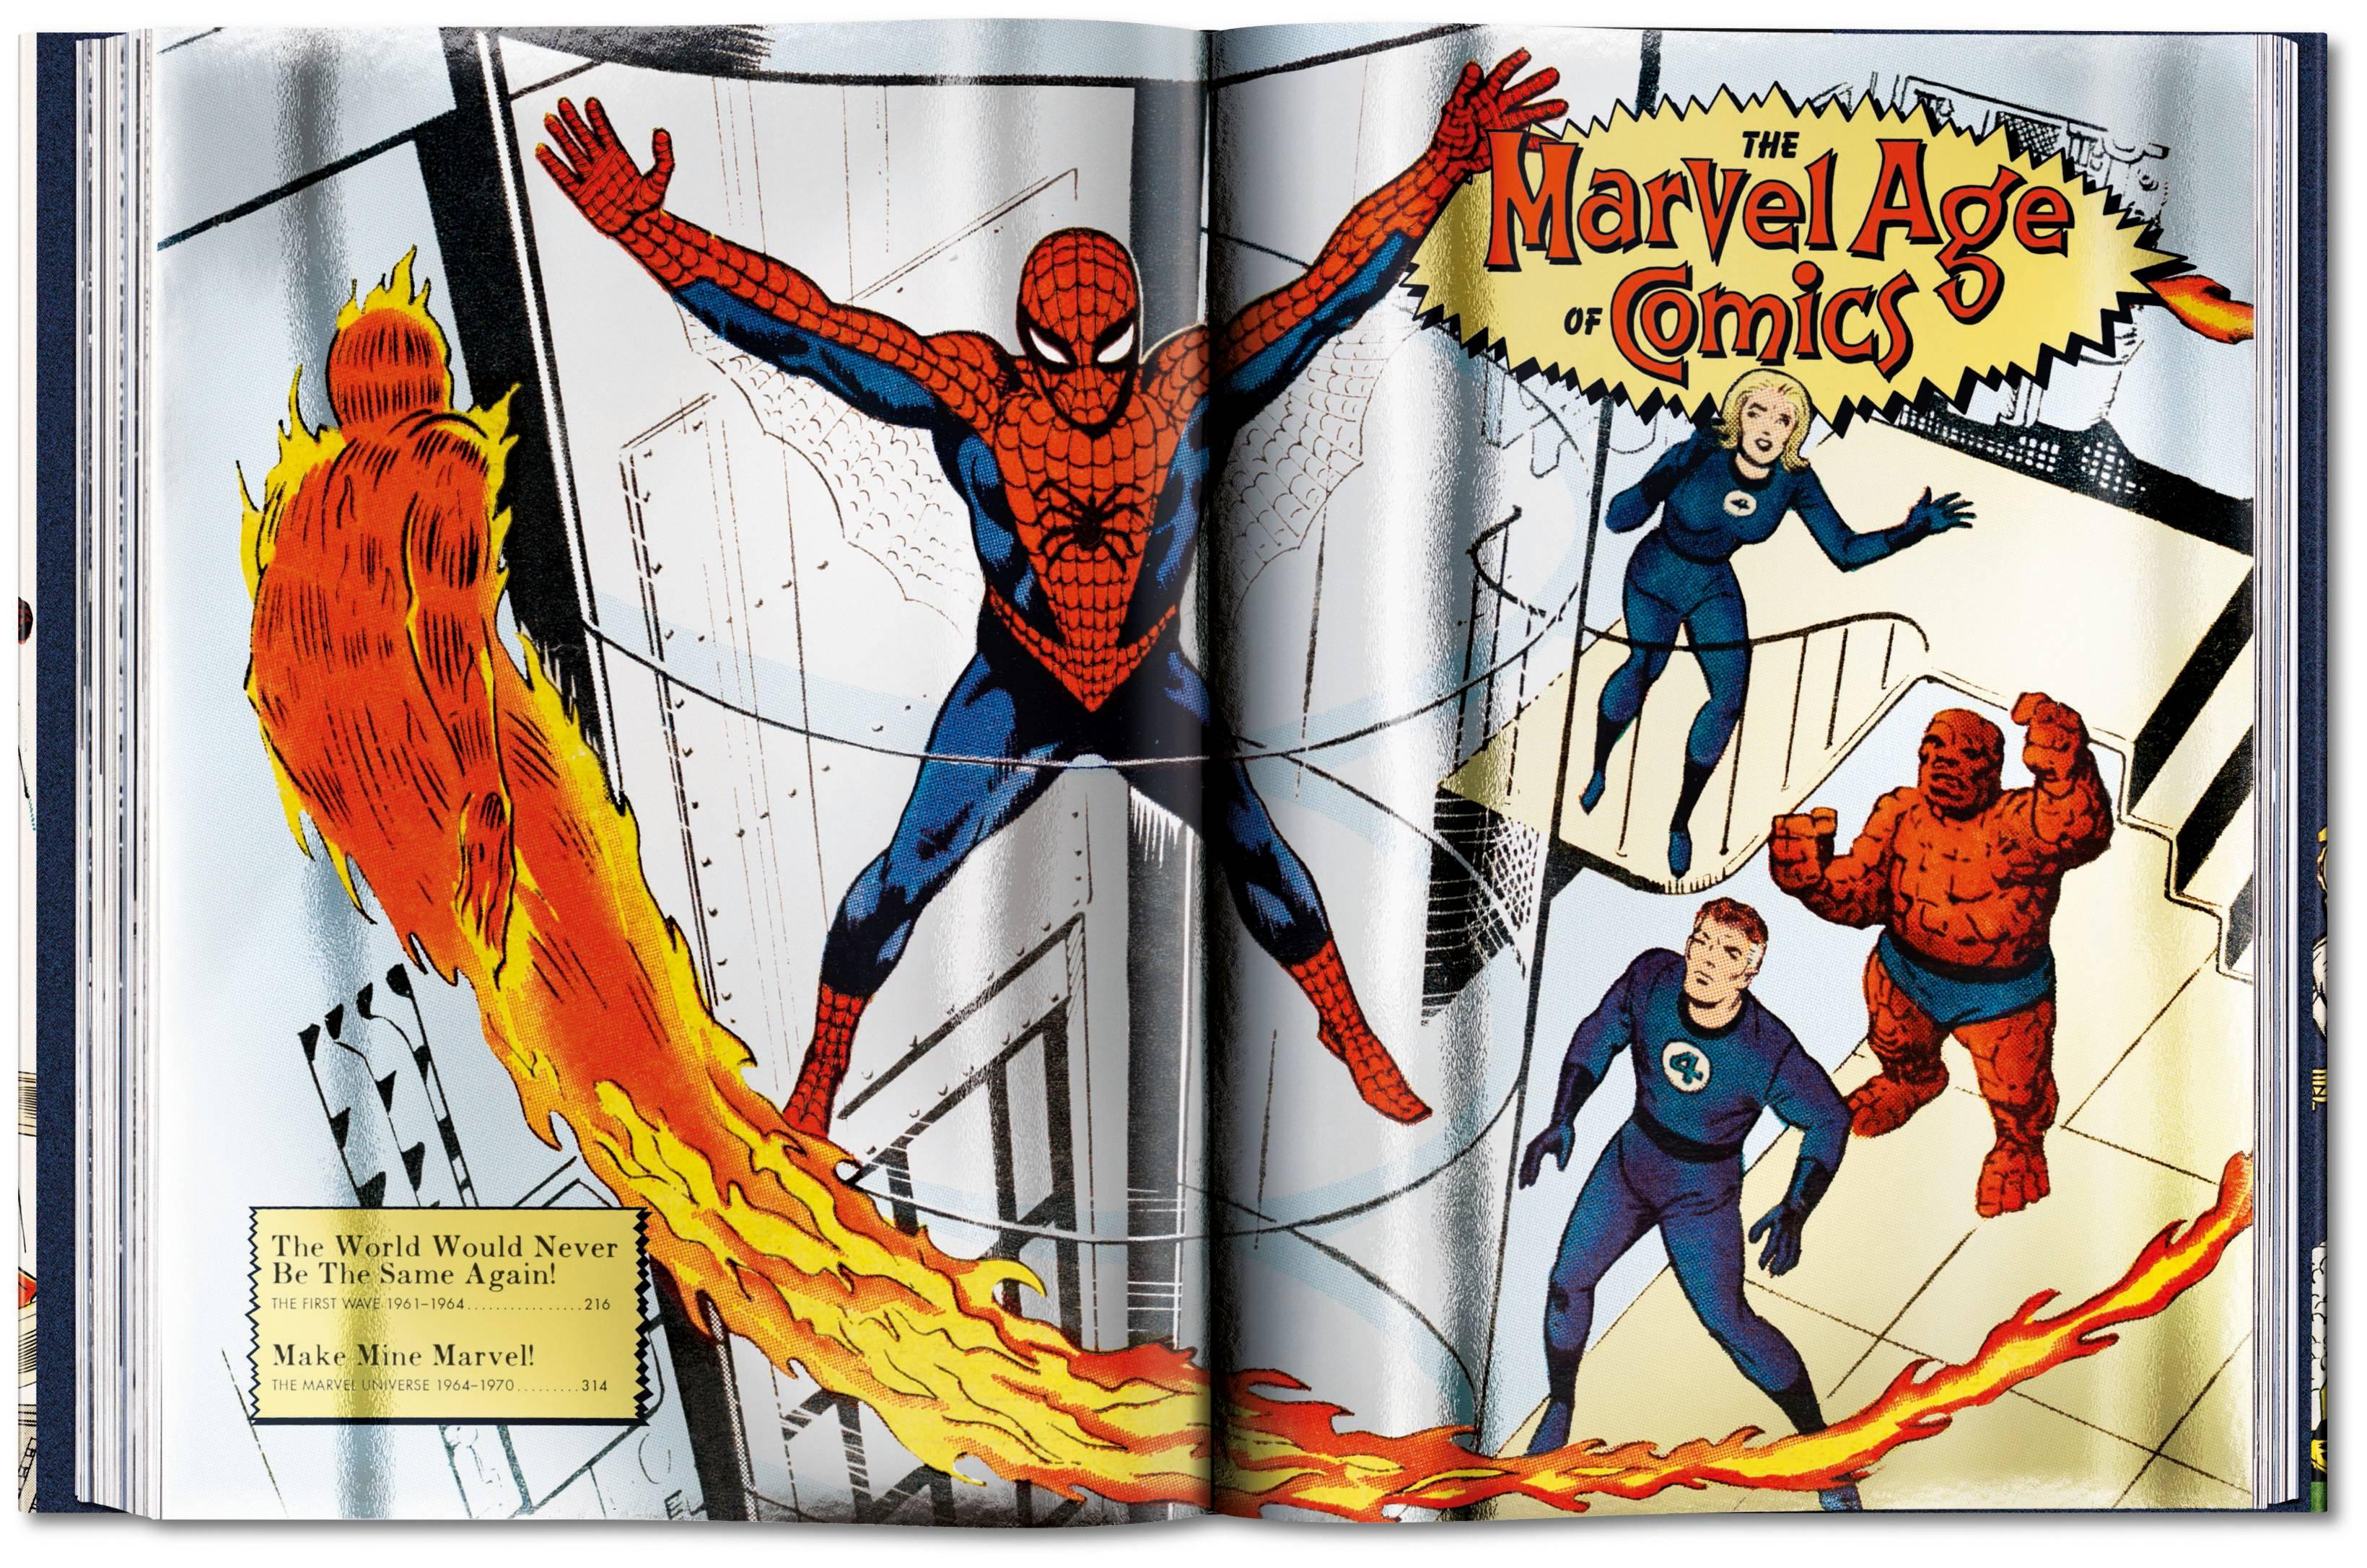 From the very first issue of pulp impresario Martin Goodman’s Marvel Comics in 1939, the comic book creators of Marvel’s Golden Age flipped the traditional fantasy script by placing the inhuman and the invincible into the real world. With the likes